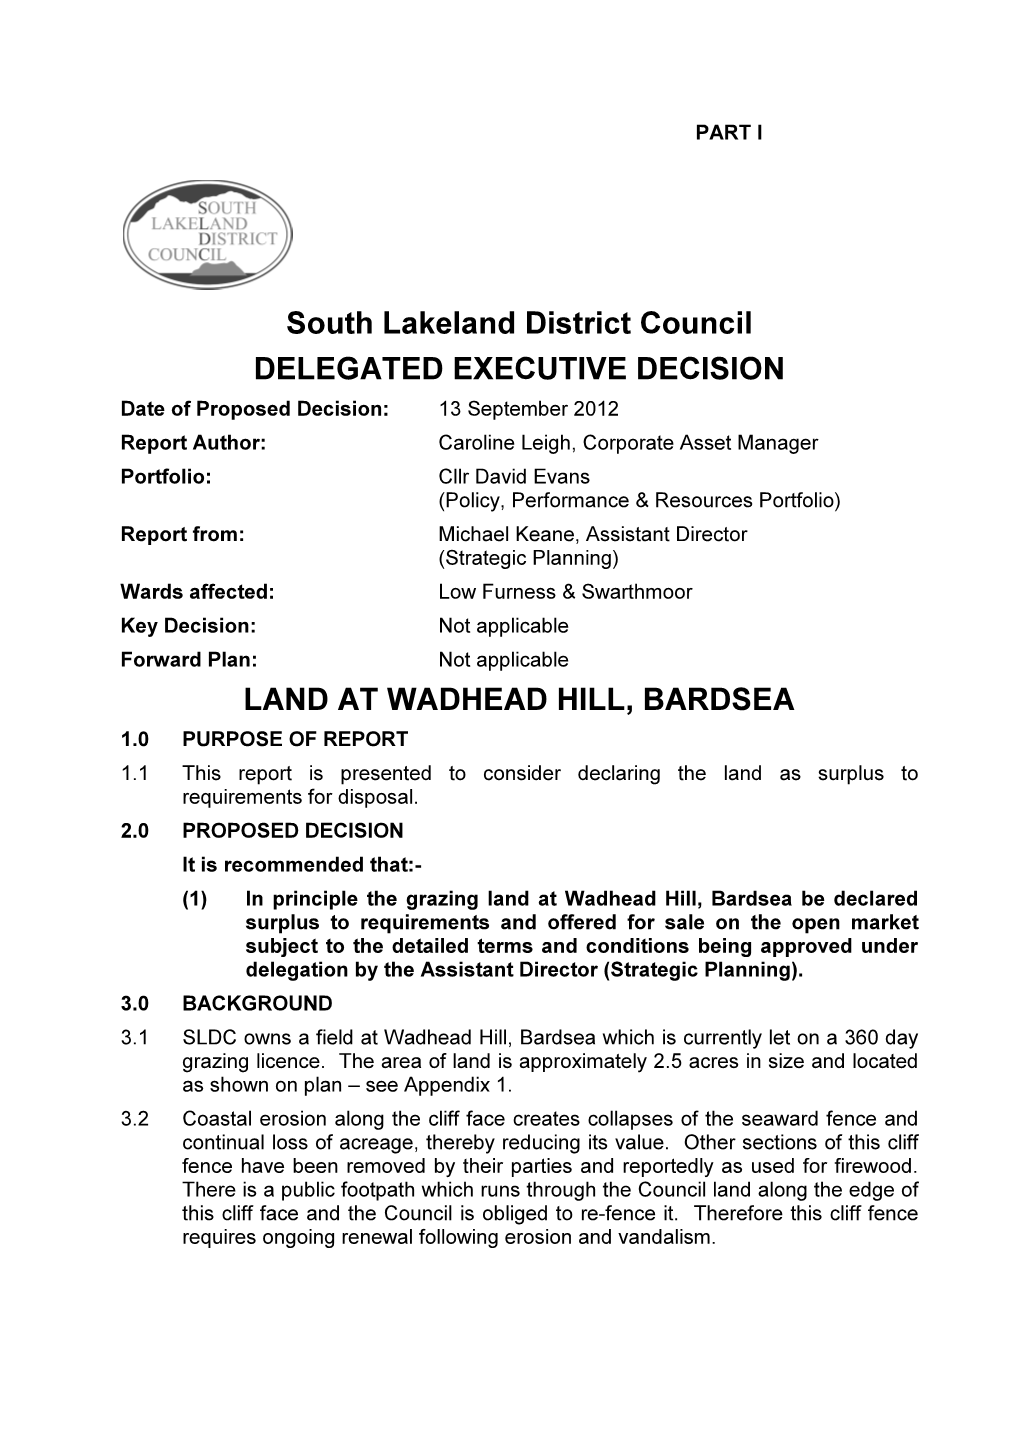 South Lakeland District Council DELEGATED EXECUTIVE